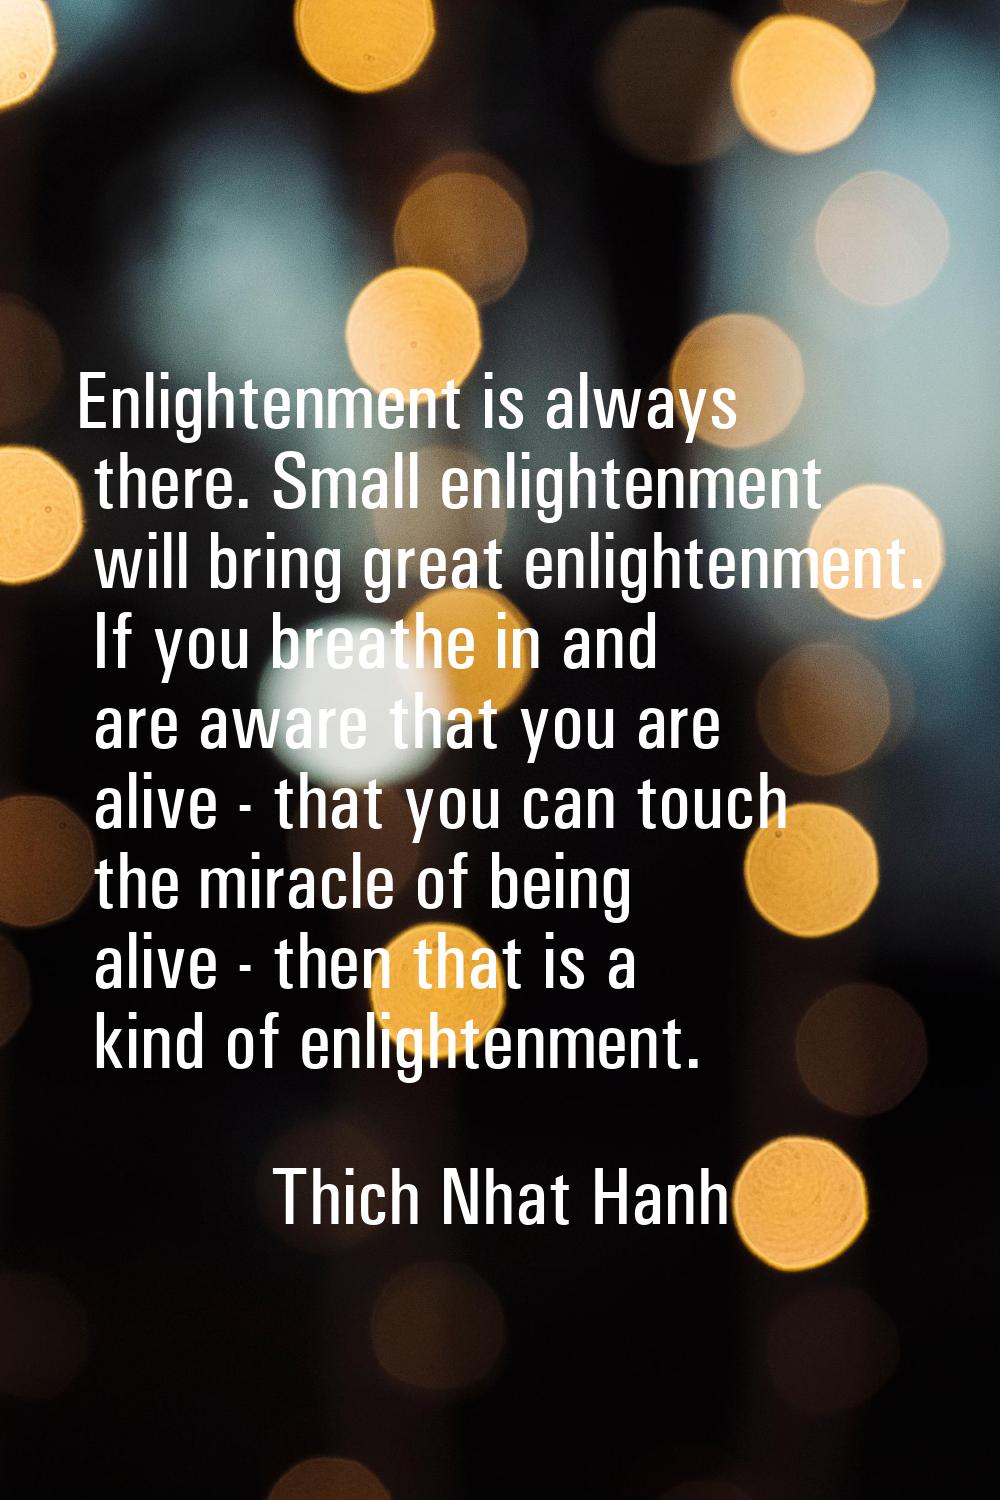 Enlightenment is always there. Small enlightenment will bring great enlightenment. If you breathe i